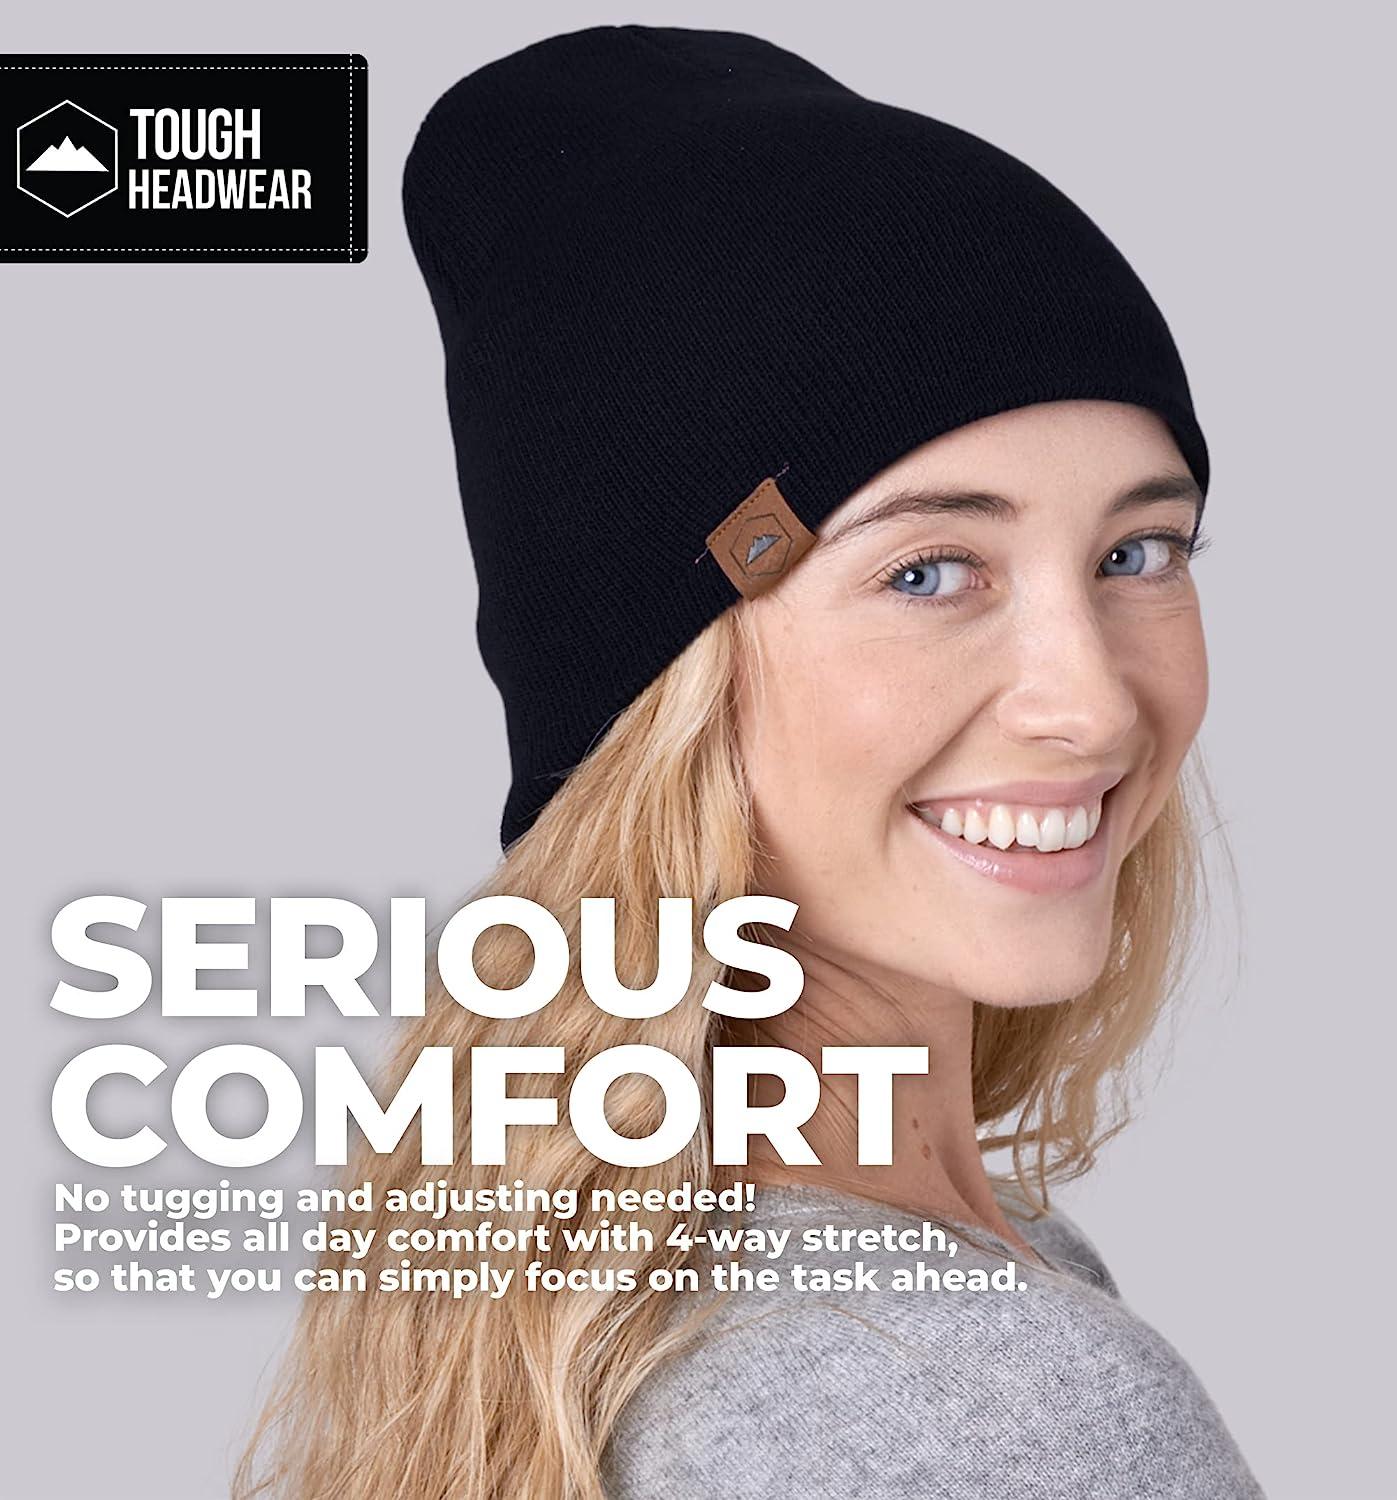 Beanie Cap - Weather Tough Cap Warm Cold One Toboggan Men for and Skate Hat, Ribbed Black Women Winter Hat Headwear Stocking Size - Knit for